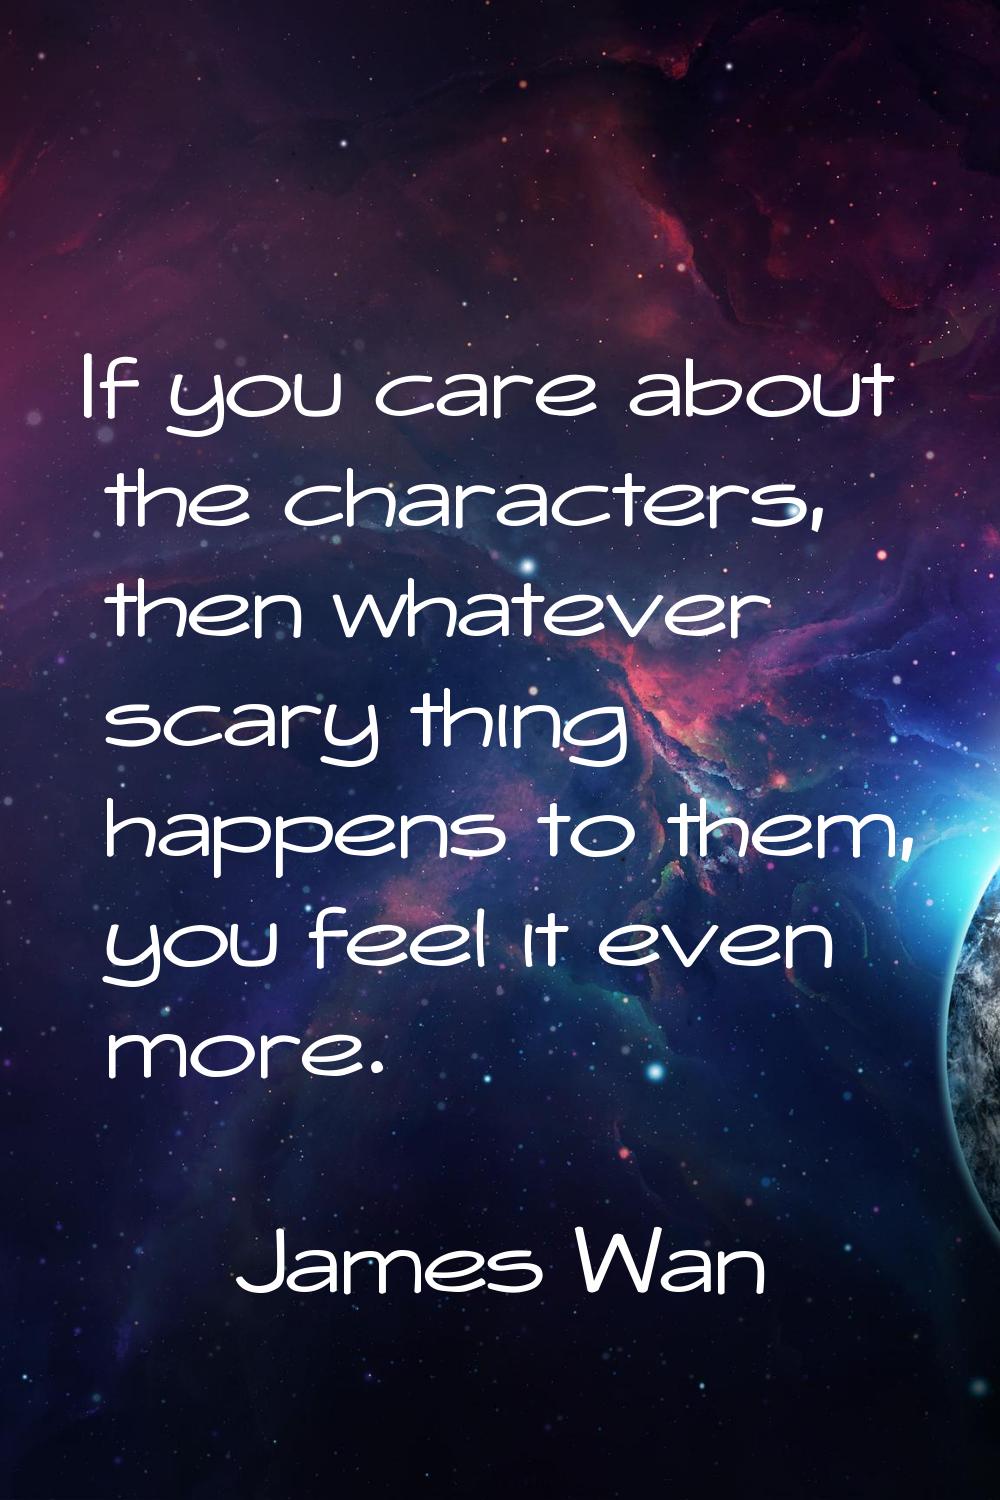 If you care about the characters, then whatever scary thing happens to them, you feel it even more.